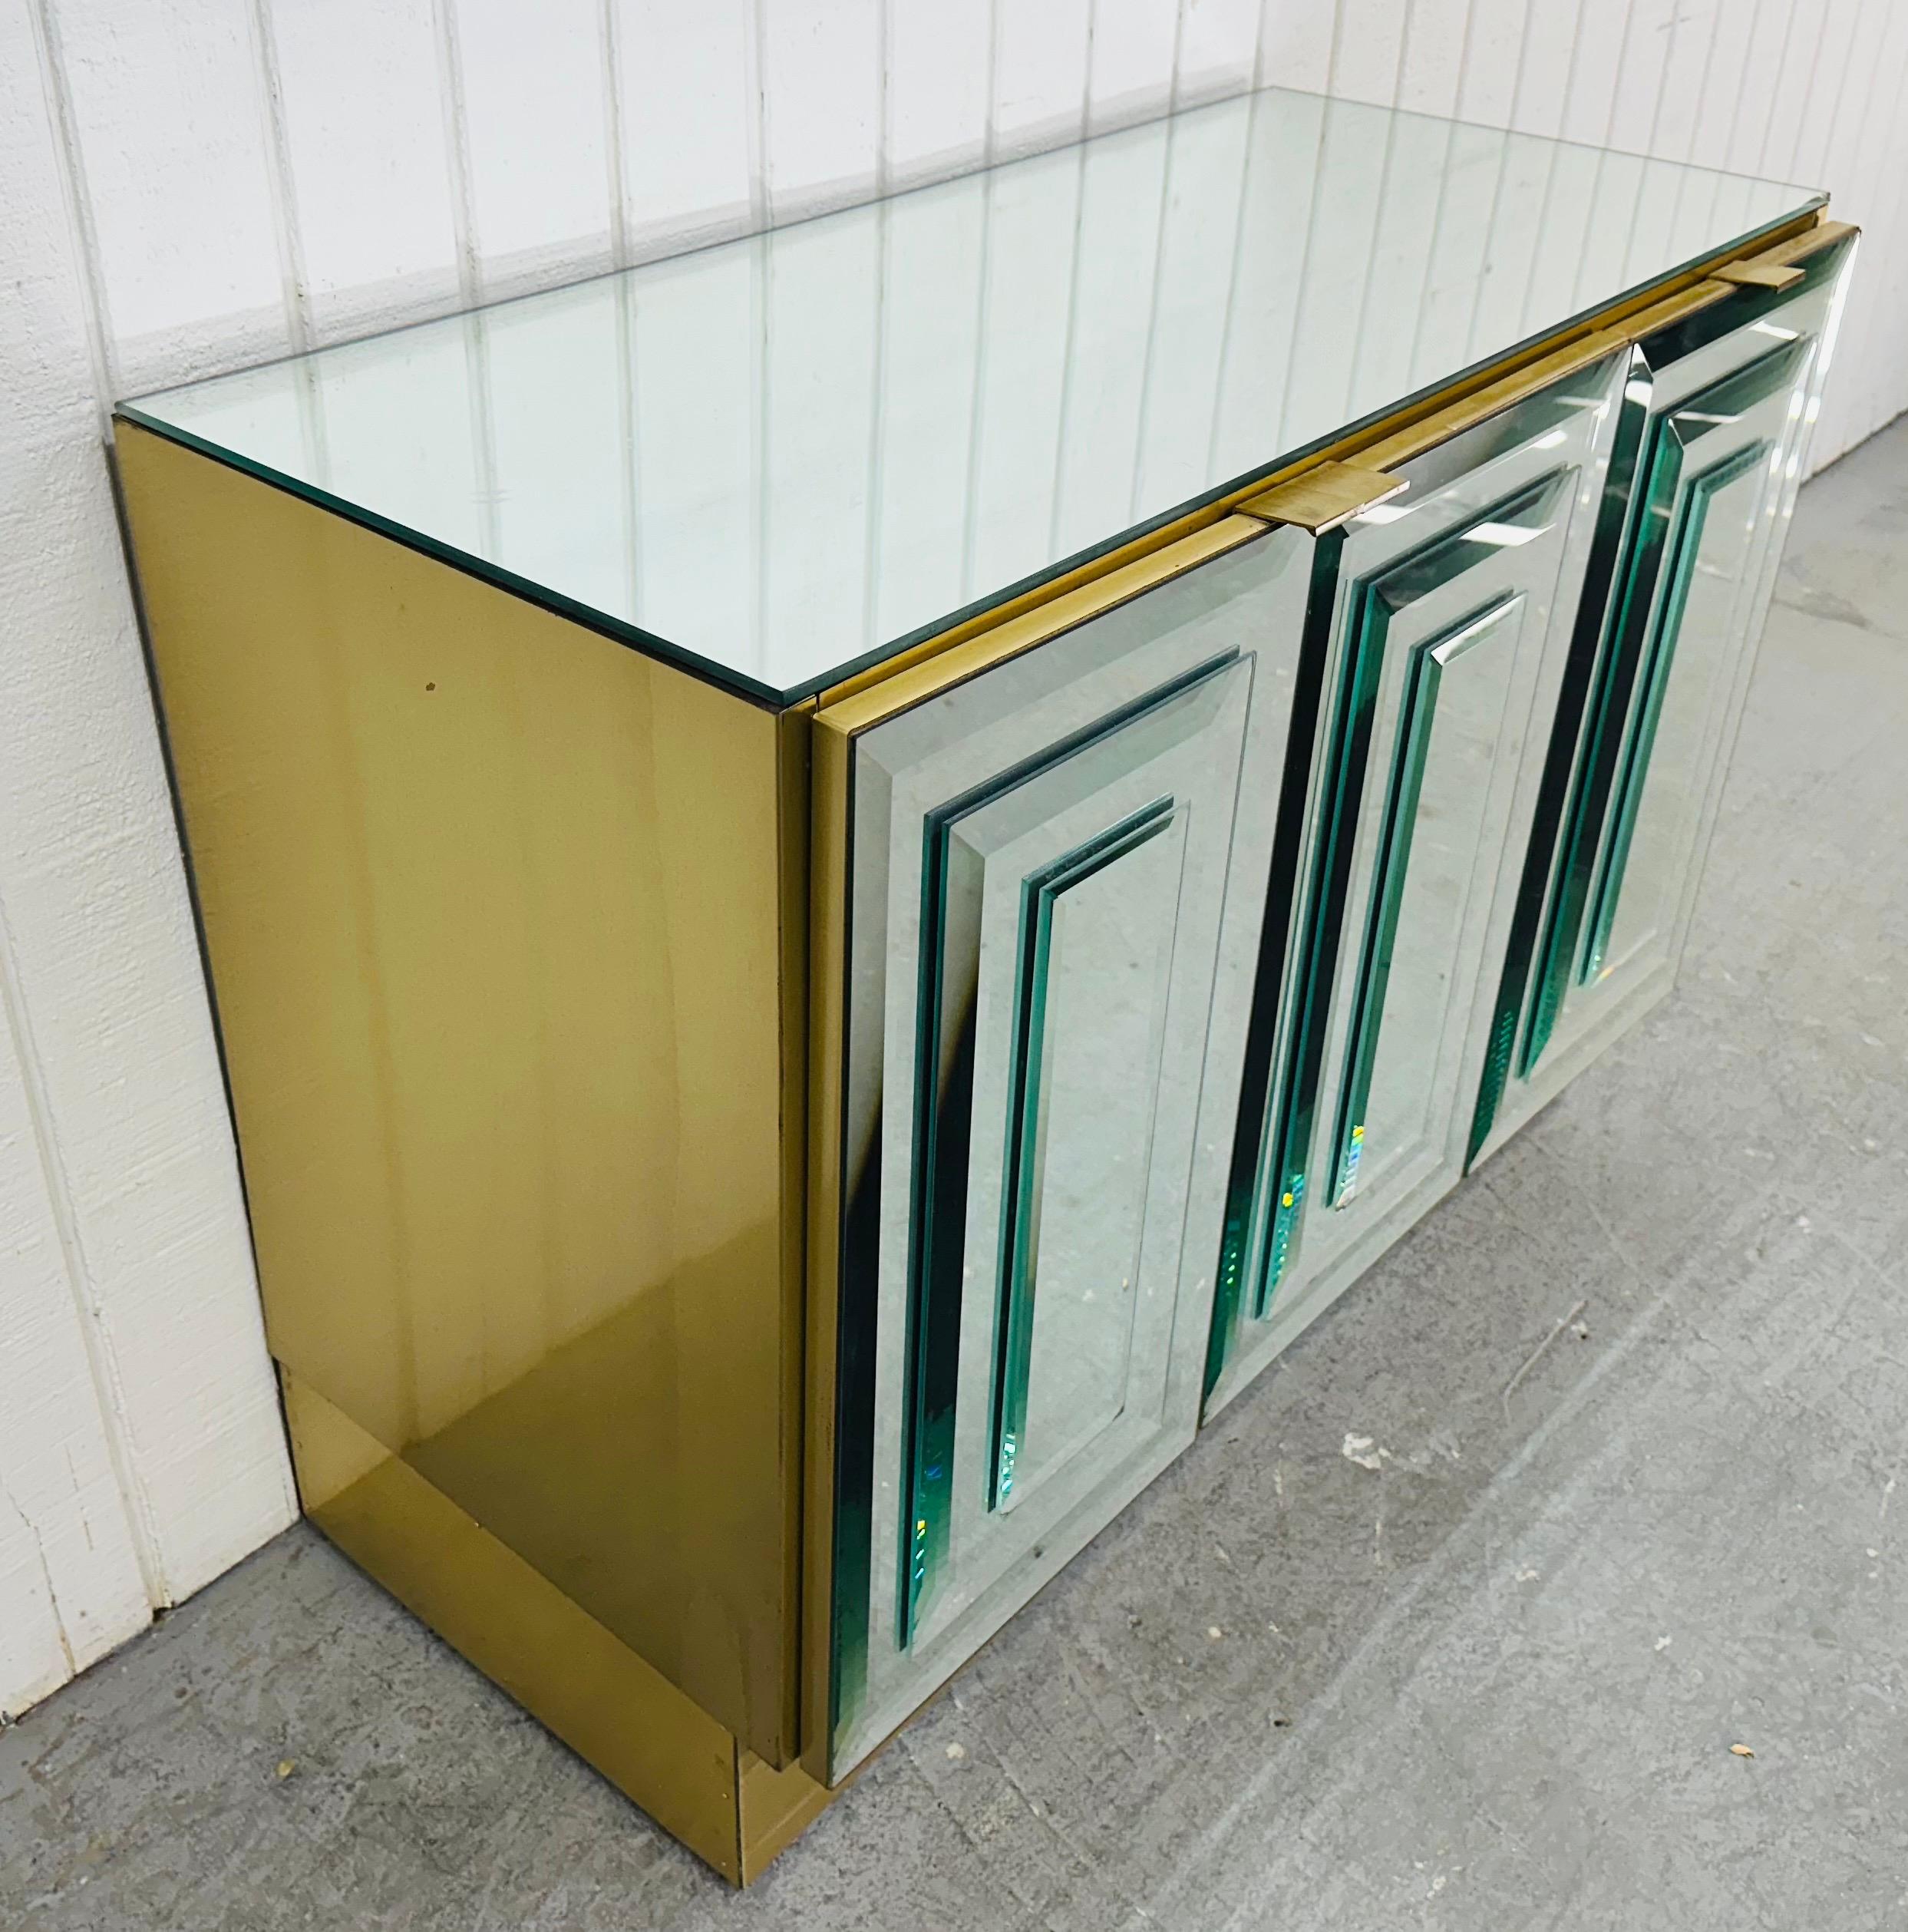 This listing is for a Vintage Hollywood Regency Mirrored Storage Cabinet. Featuring a straight line design, three mirrored doors that open up to storage space, mirrored top, brass sides and plinth base. This is an exceptional combination of quality